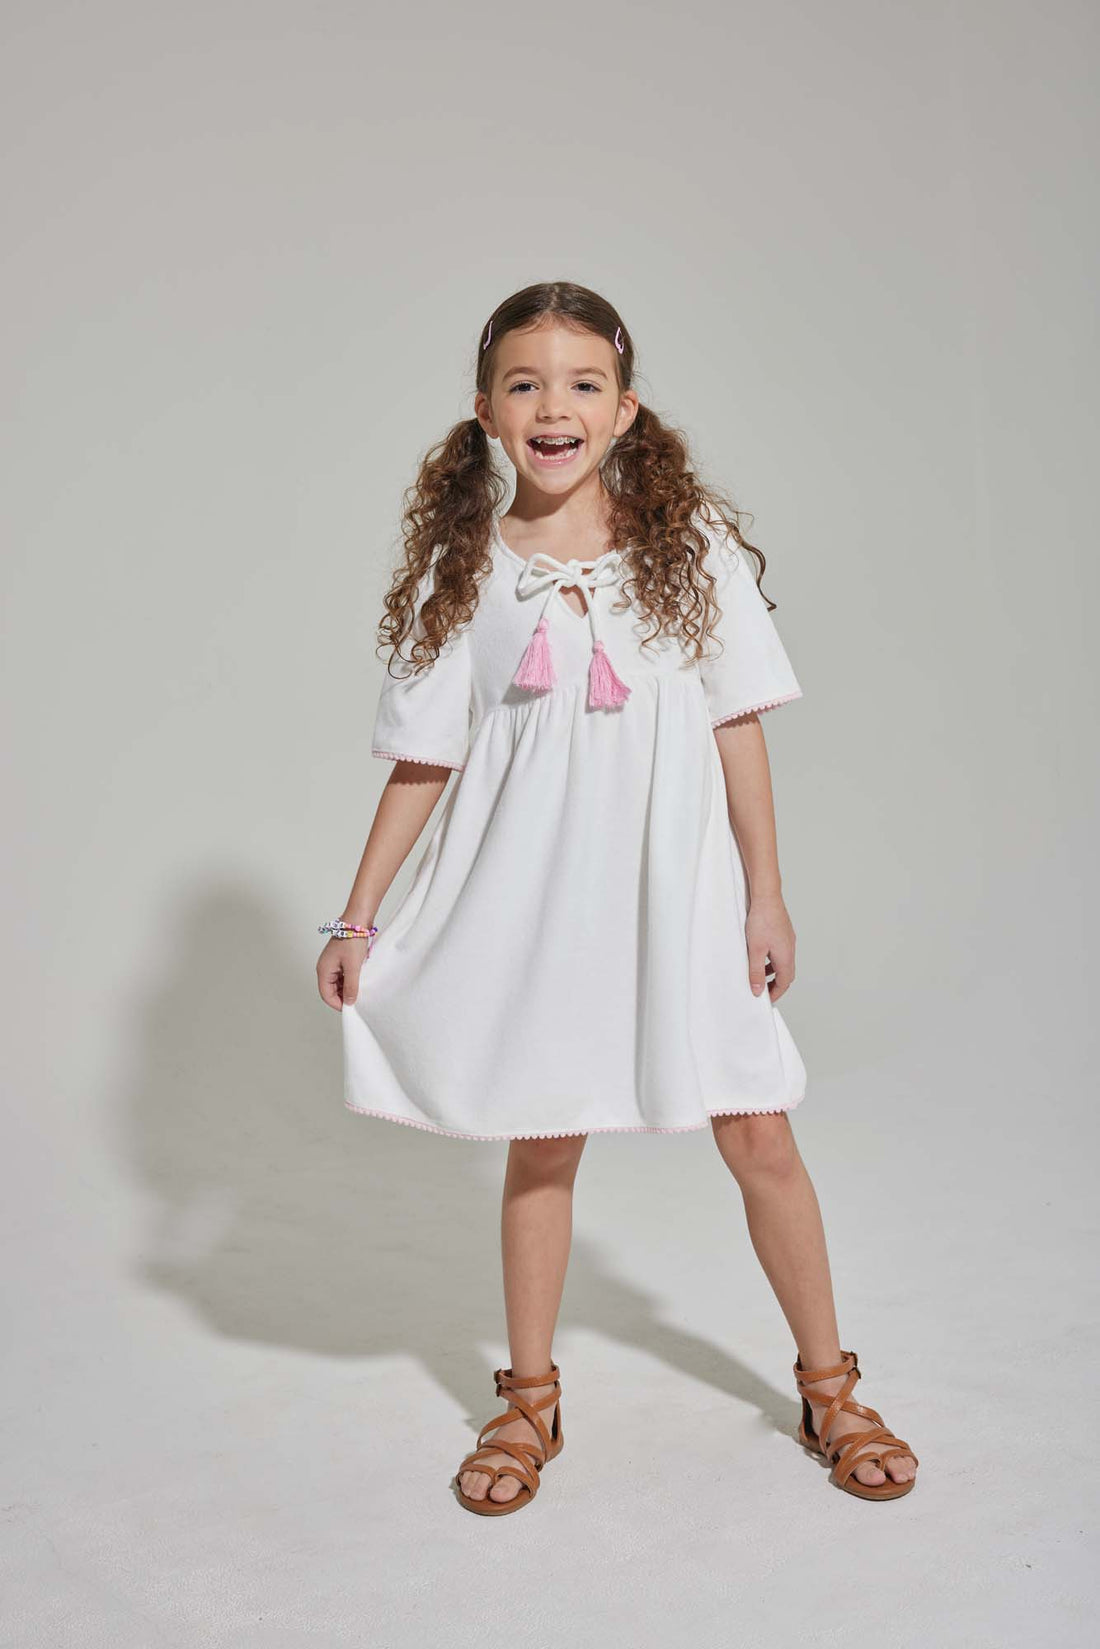 tween girls white terry cloth dress with pink trim and pink tassels